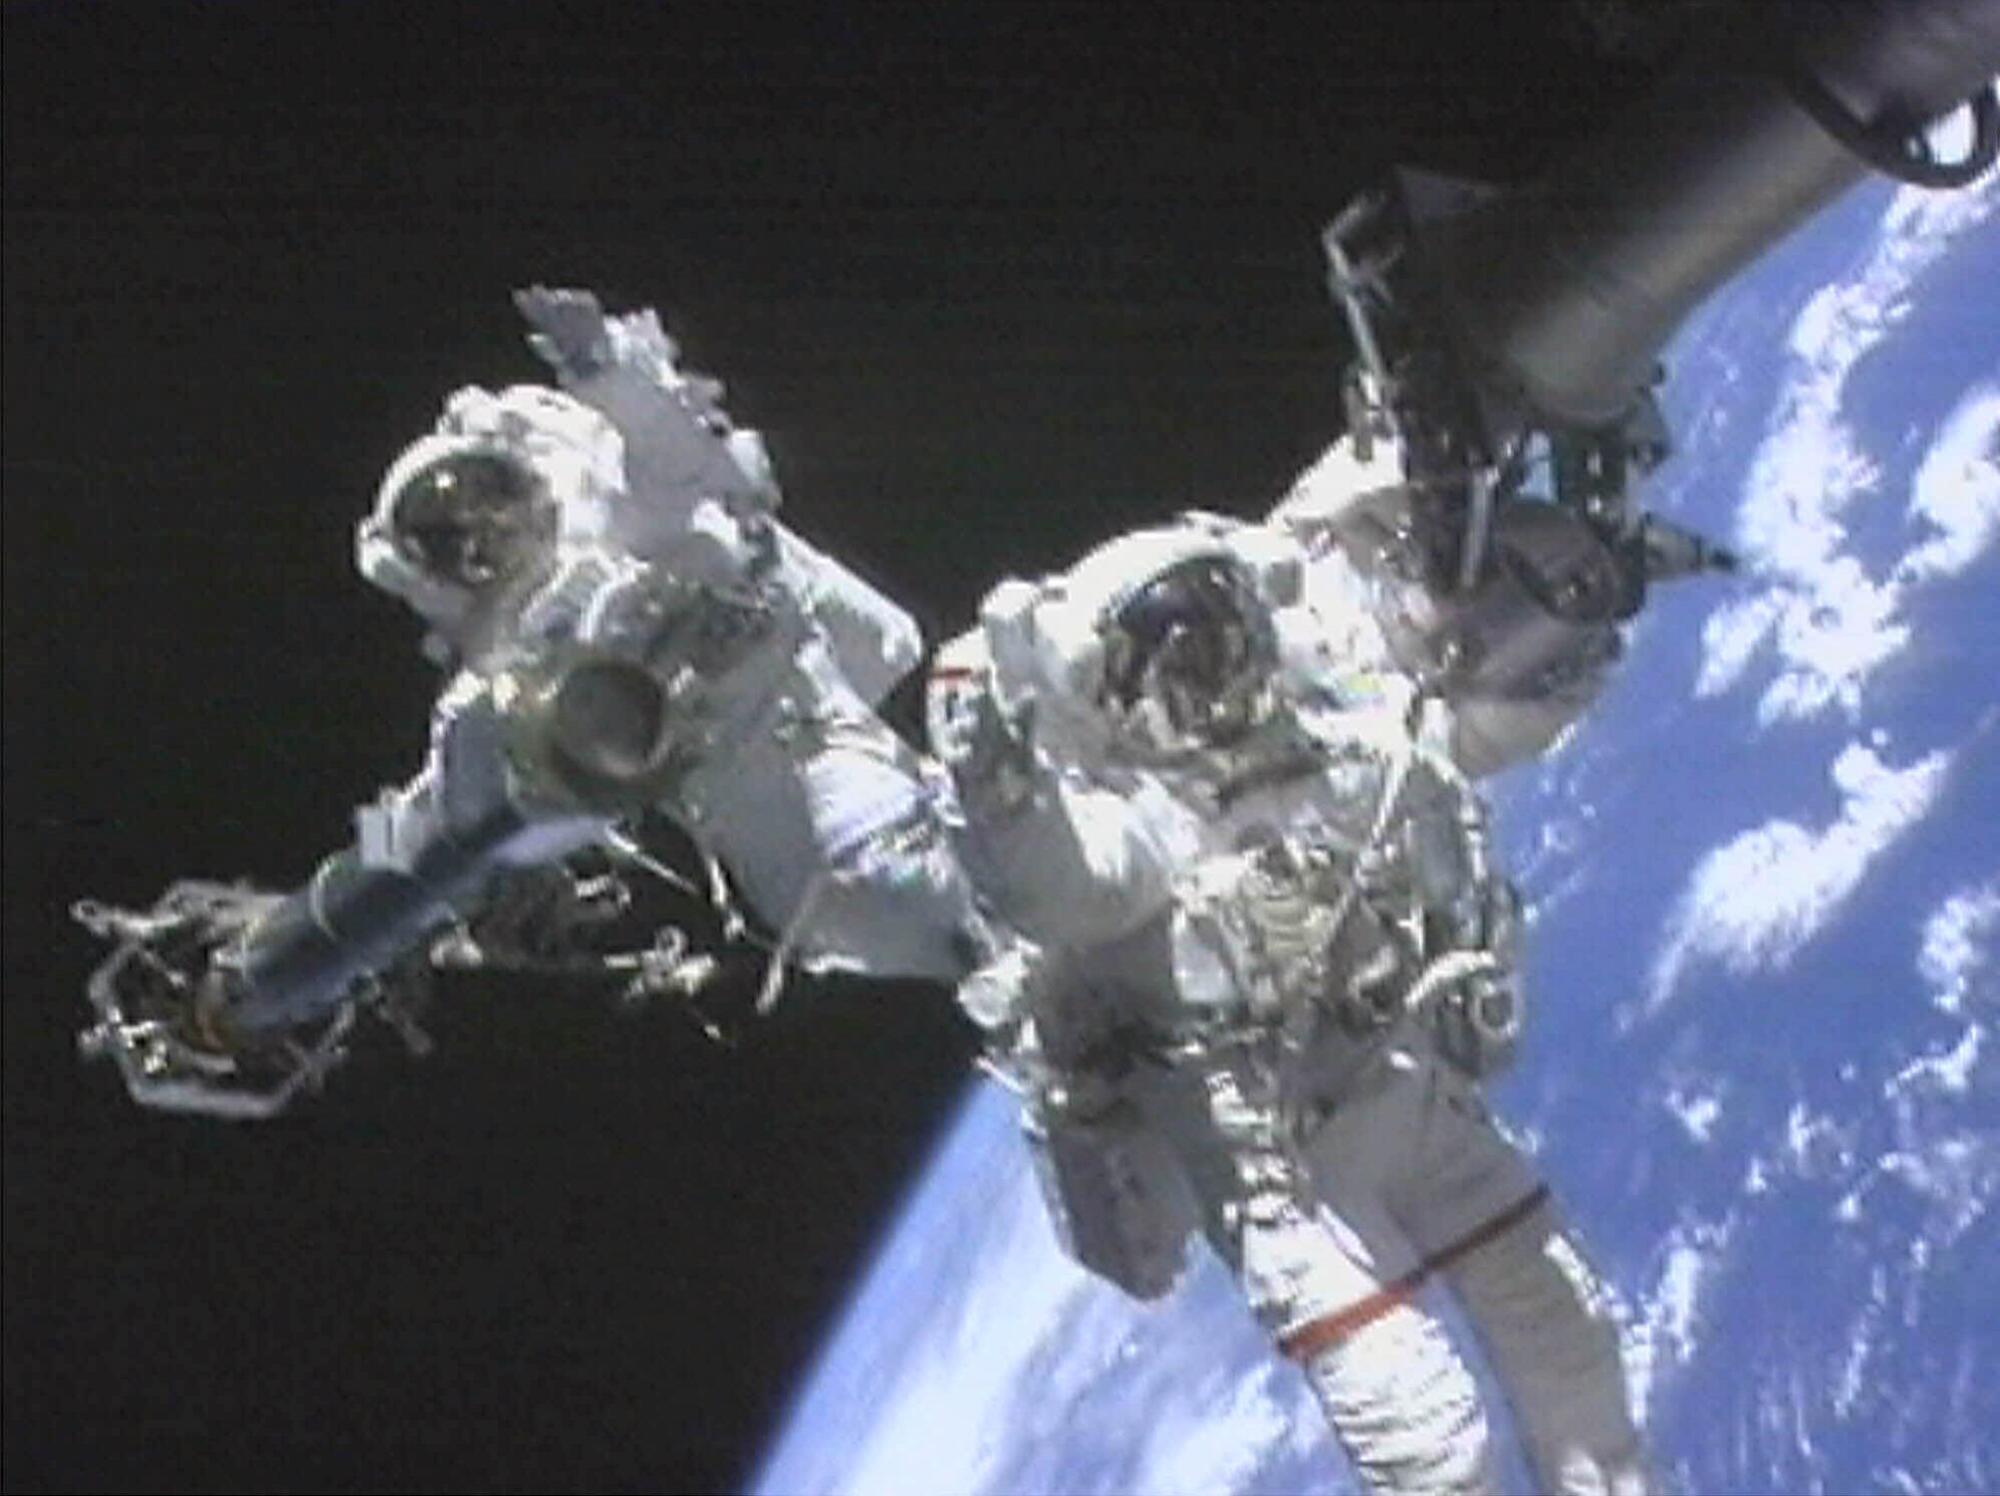 Two astronauts in spacesuits on a space walk, the Earth visible behind them